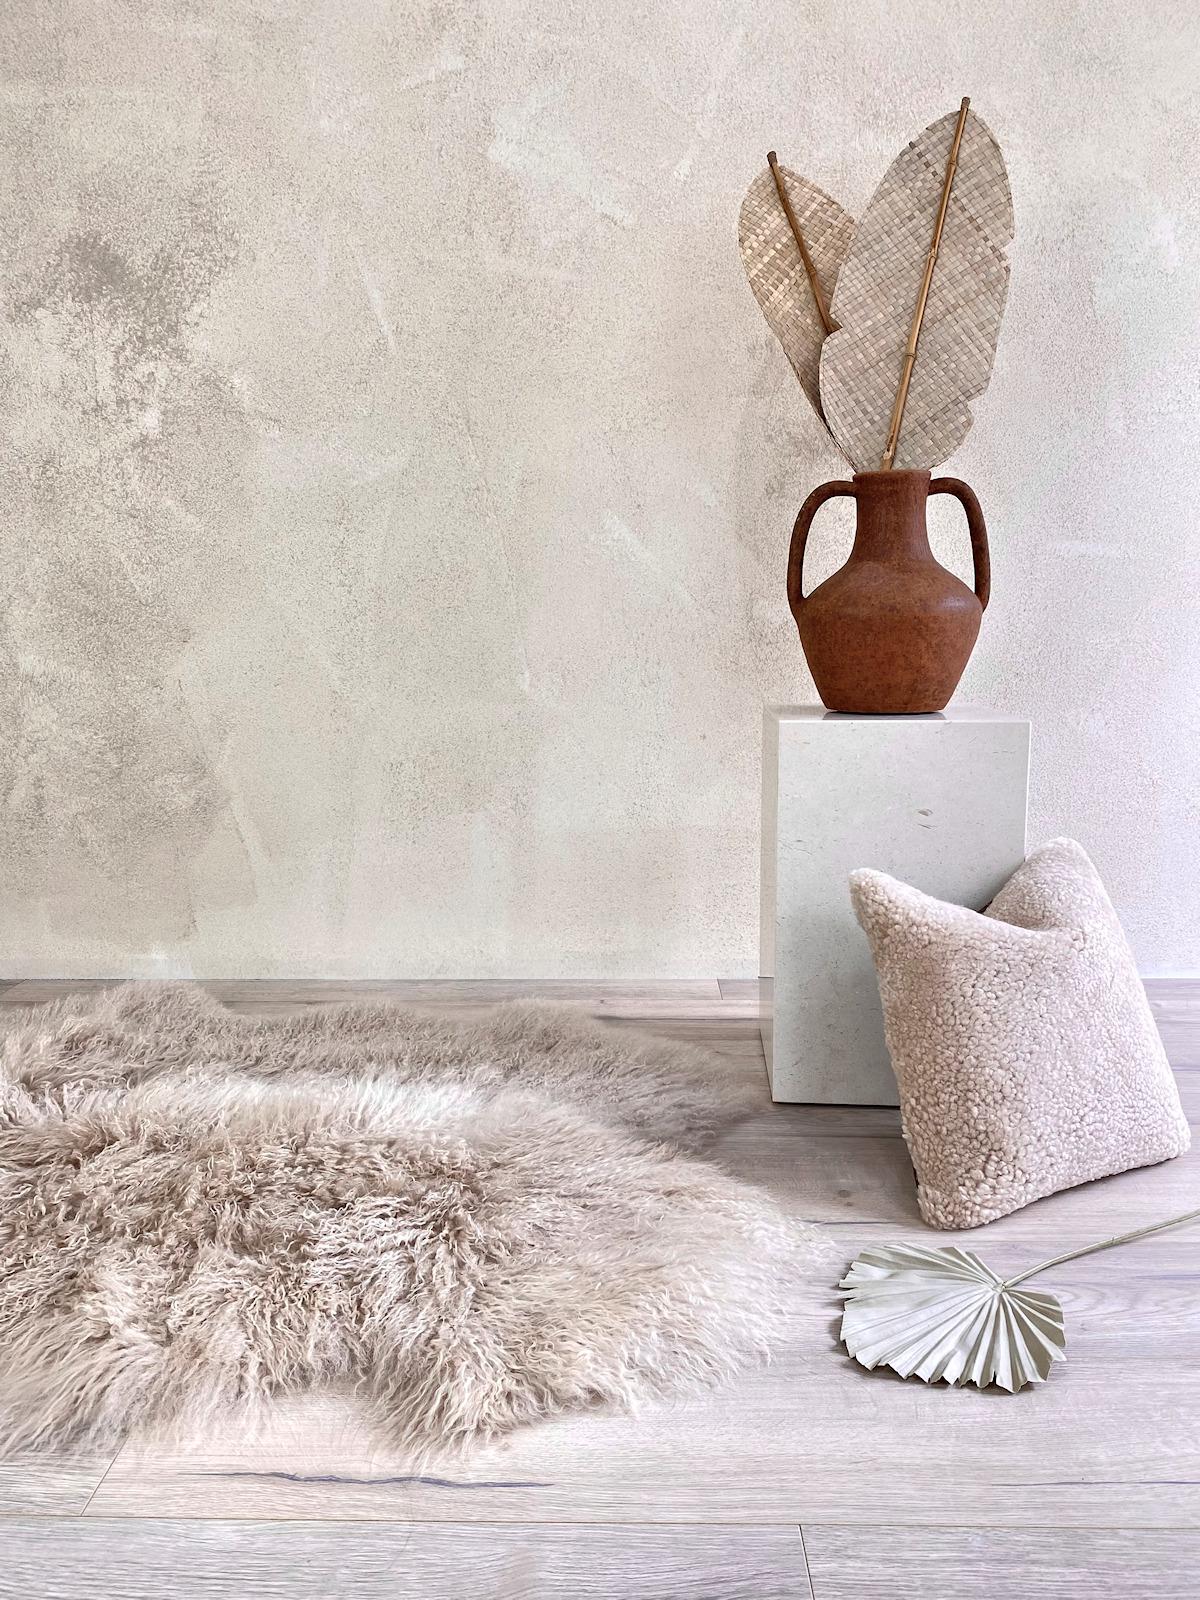 Elevate the luxury of your decor with this luxurious Mongolian Fur Rug / throw. Whether styling a sofa or adding glamour to a master suite, this exquisite Mongolian fur will uplift the elegance and ambiance giving you the versatility in styling as